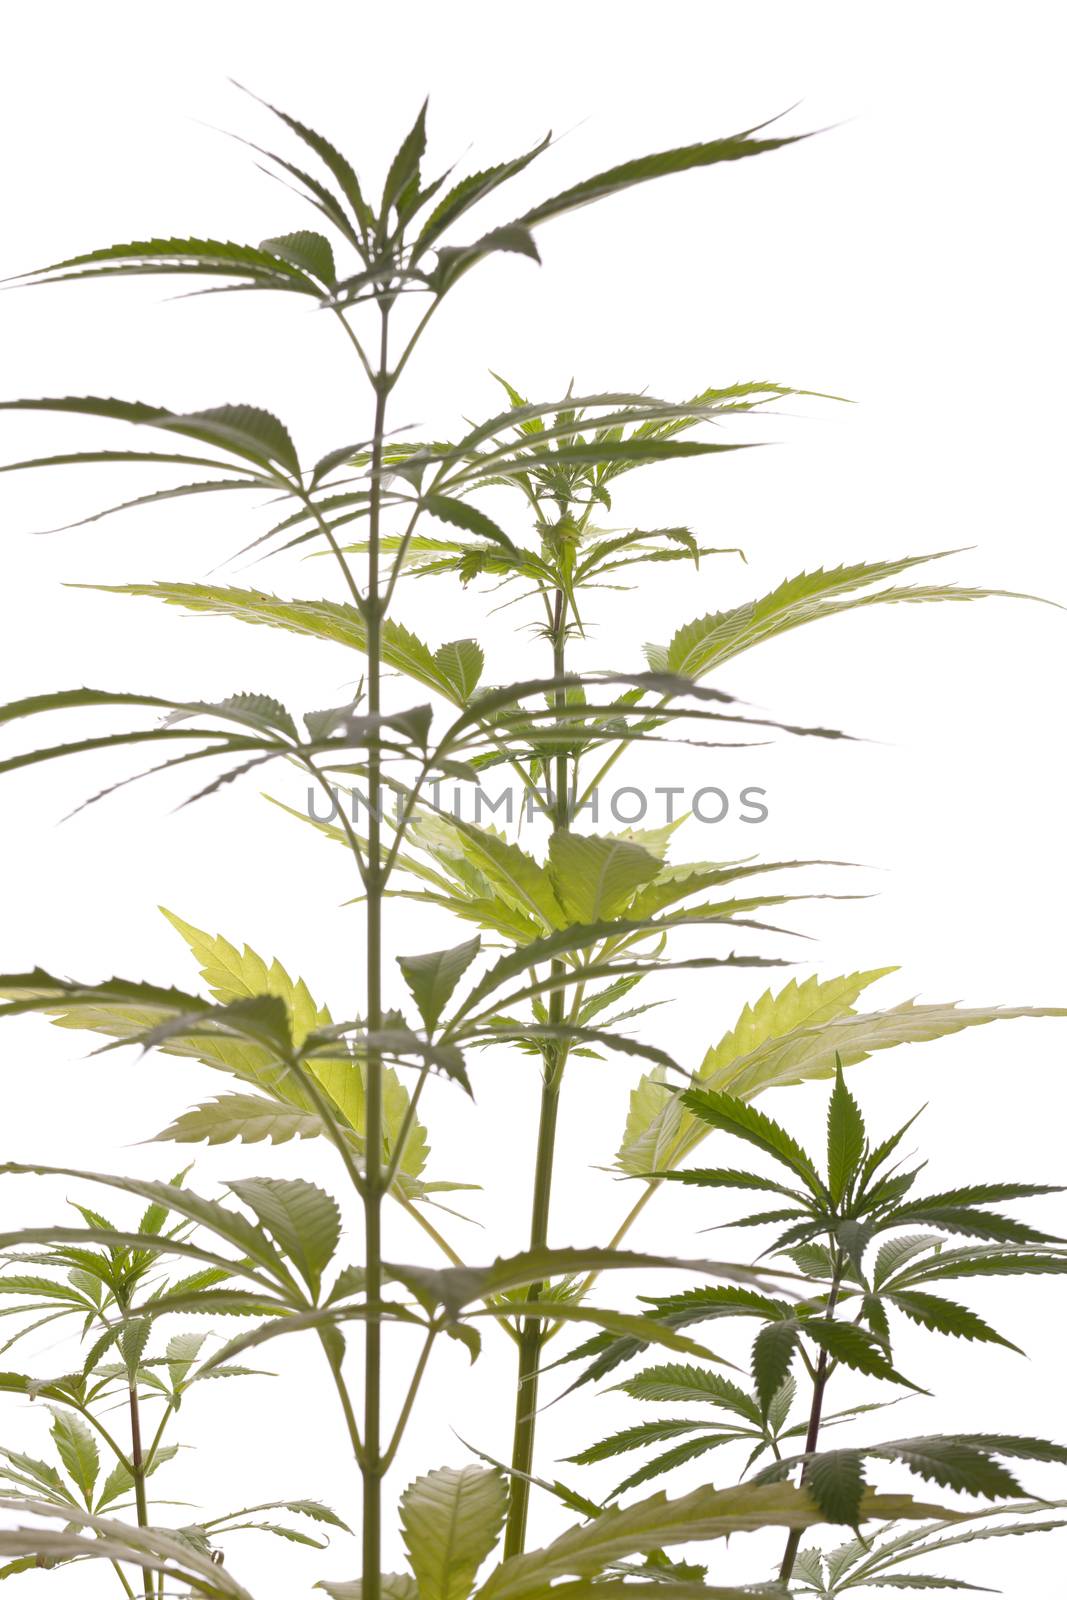 Close up Fresh Cannabis or Marijuana Plant Leaves for Psychoactive Drug or Medicine, Isolated on White Background